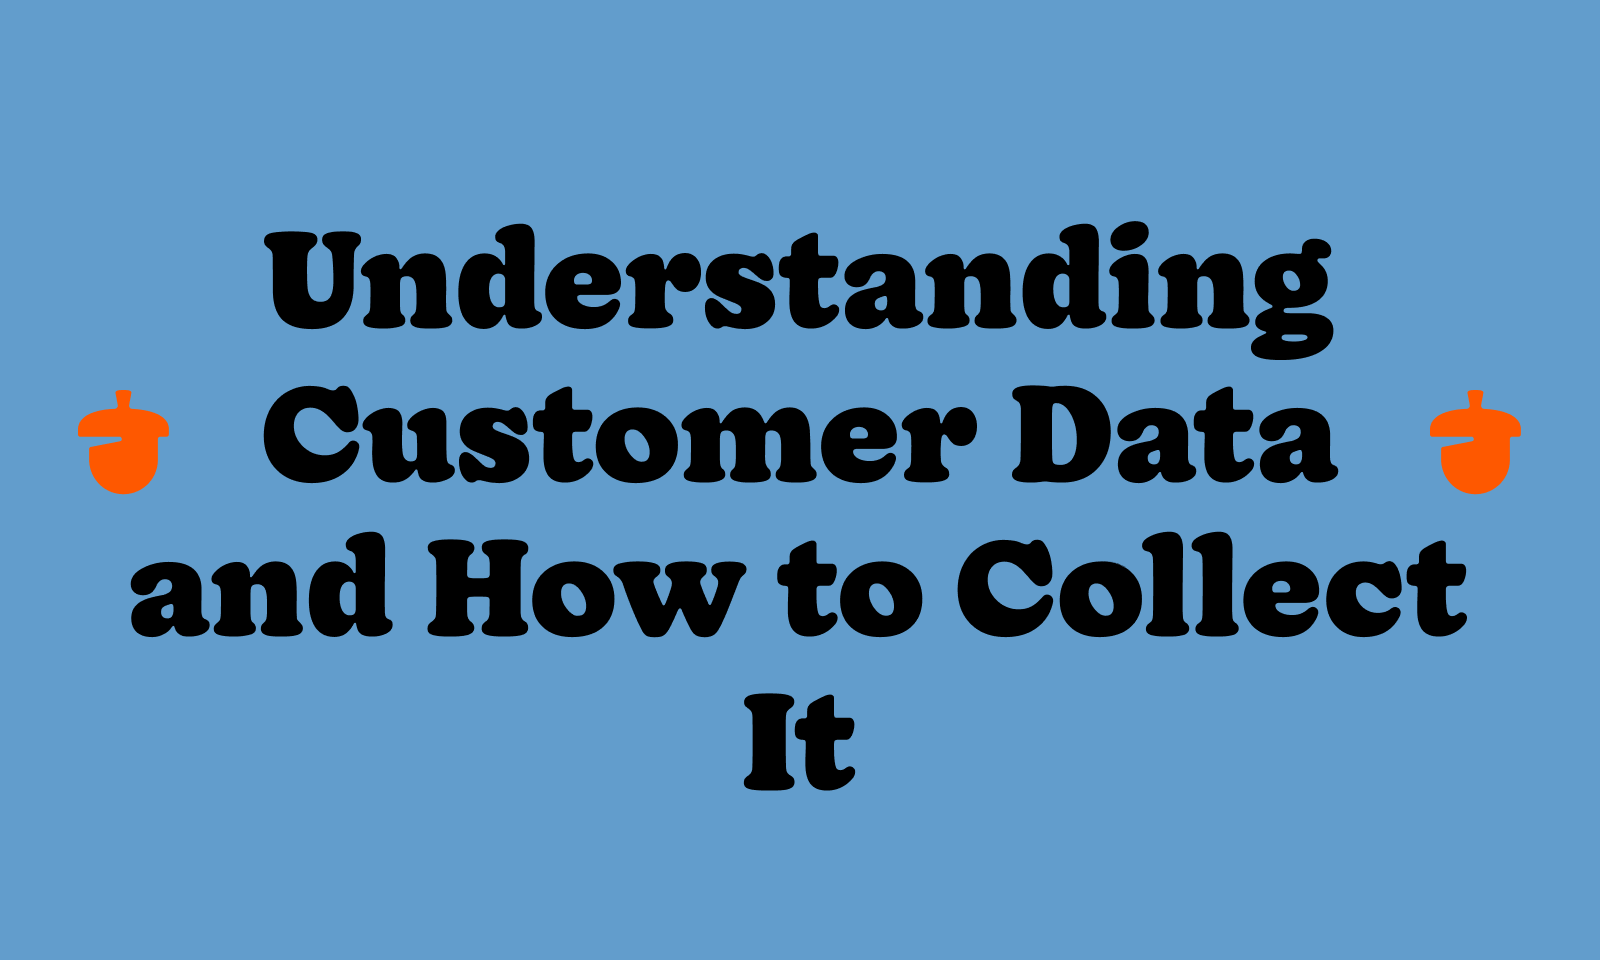 Understanding customer data and how to collect it